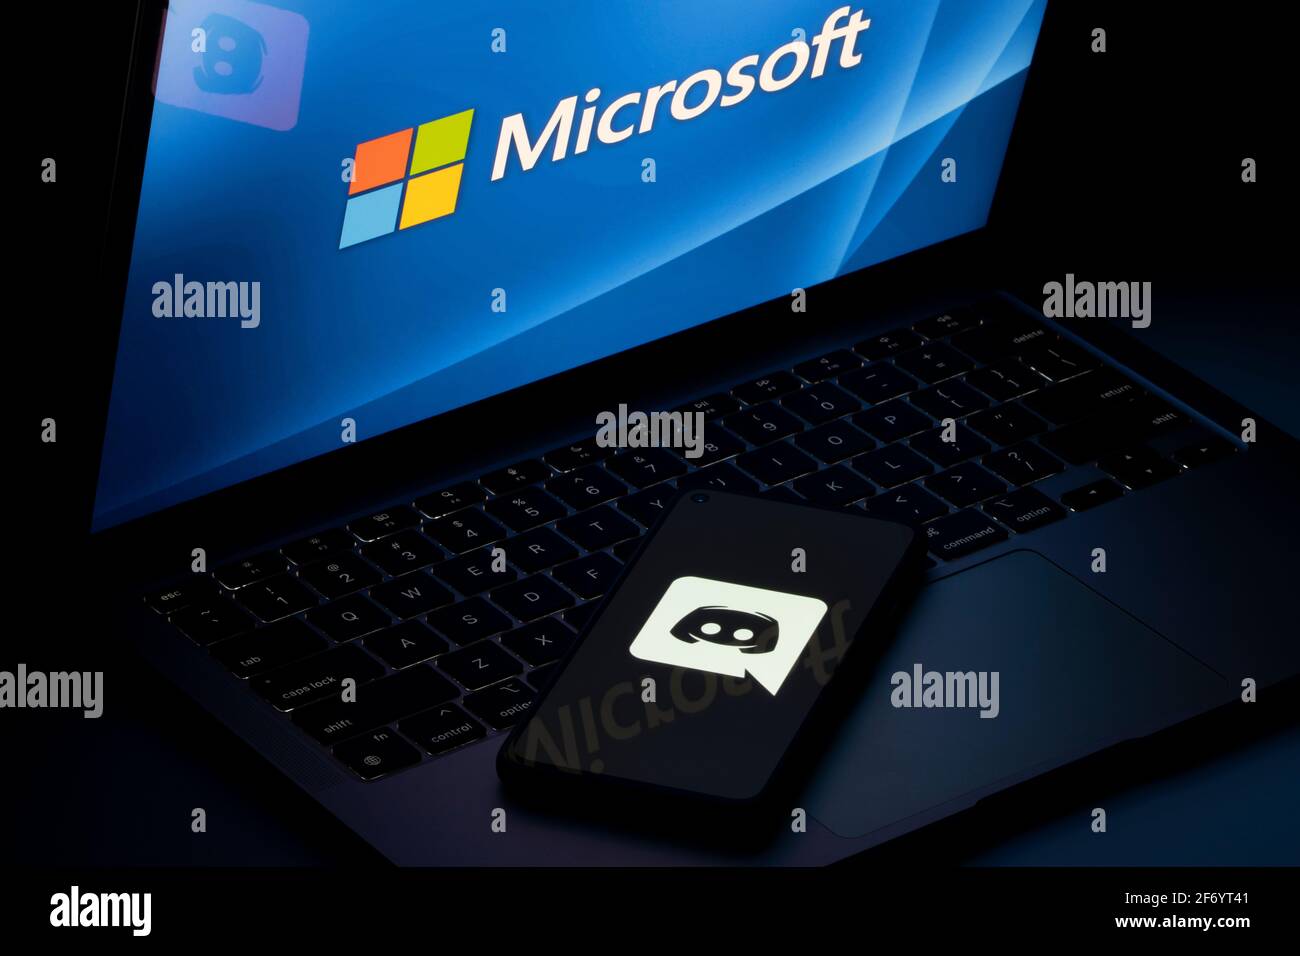 Discord app icon is seen on a smartphone with Microsoft logo on laptop screen in the background. Microsoft is in talks to acquire Discord, a video game... Stock Photo